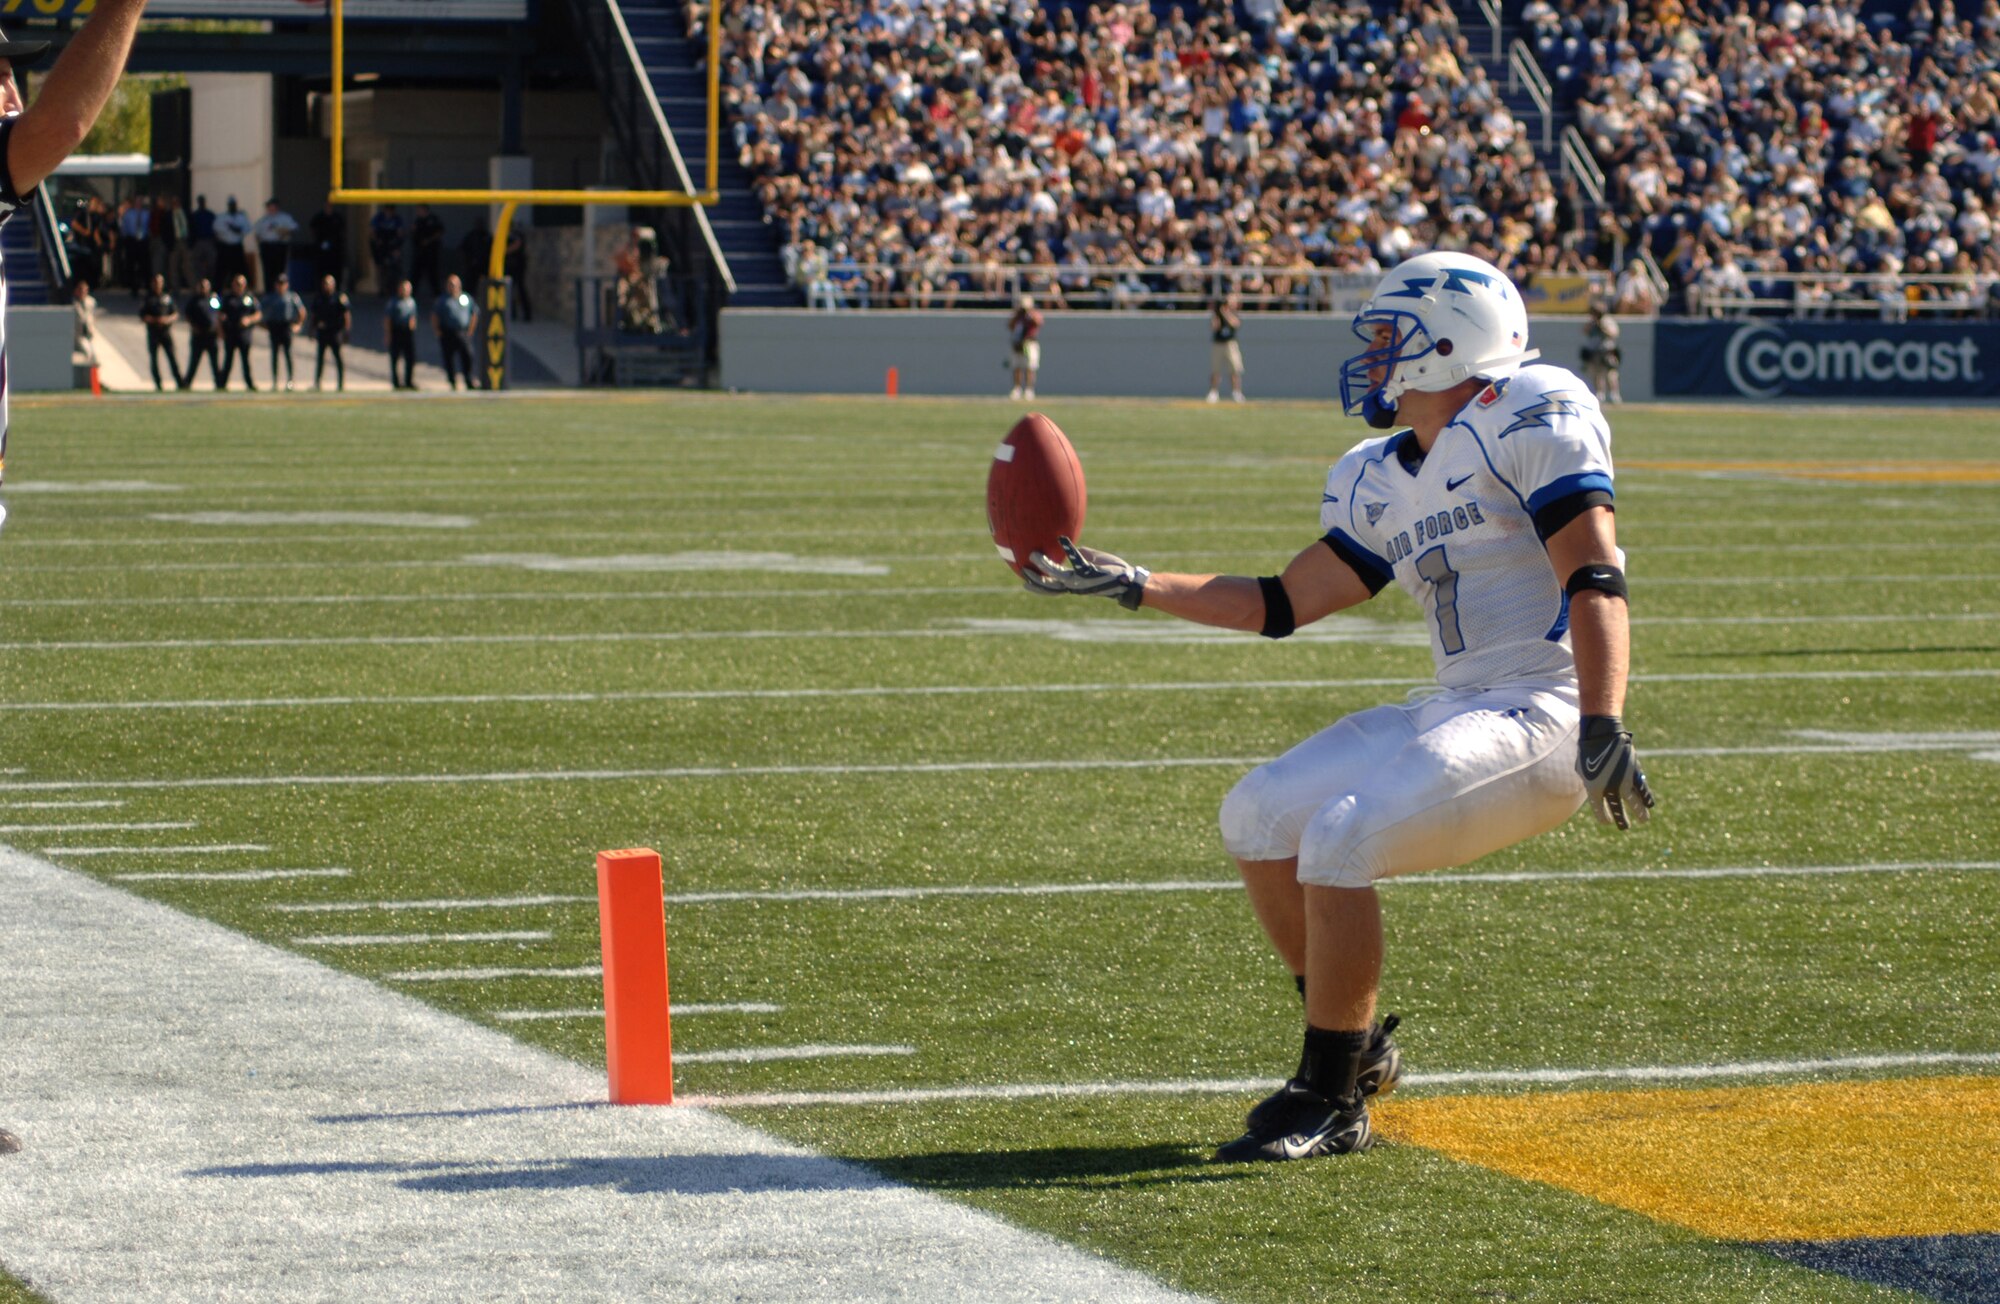 U.S. Air Force Academy Falcon receiver Chad Hall flips the ball to an official after scoring on an end around play in the third quarter of Air Force's 31-20 loss to Navy Sept. 29 at Annapolis, Md. The senior carried six times for 29 yards. (U.S. Air Force photo/Capt. Jillian Torango) 

